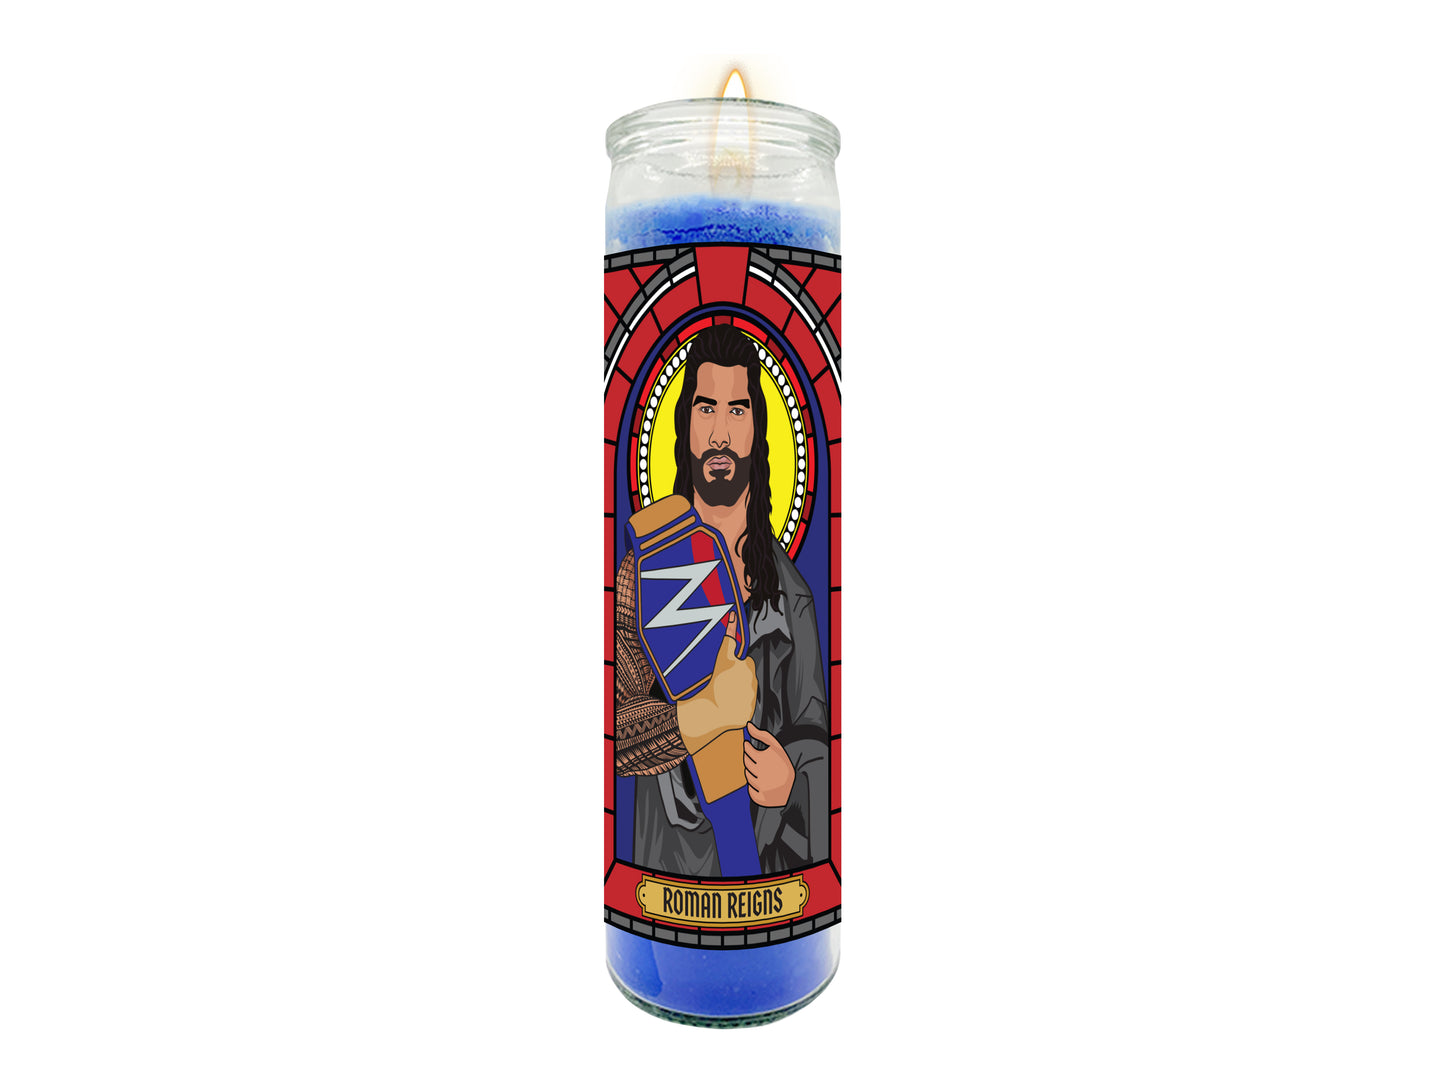 Roman Reigns Professional Wrestler Illustrated Prayer Candle